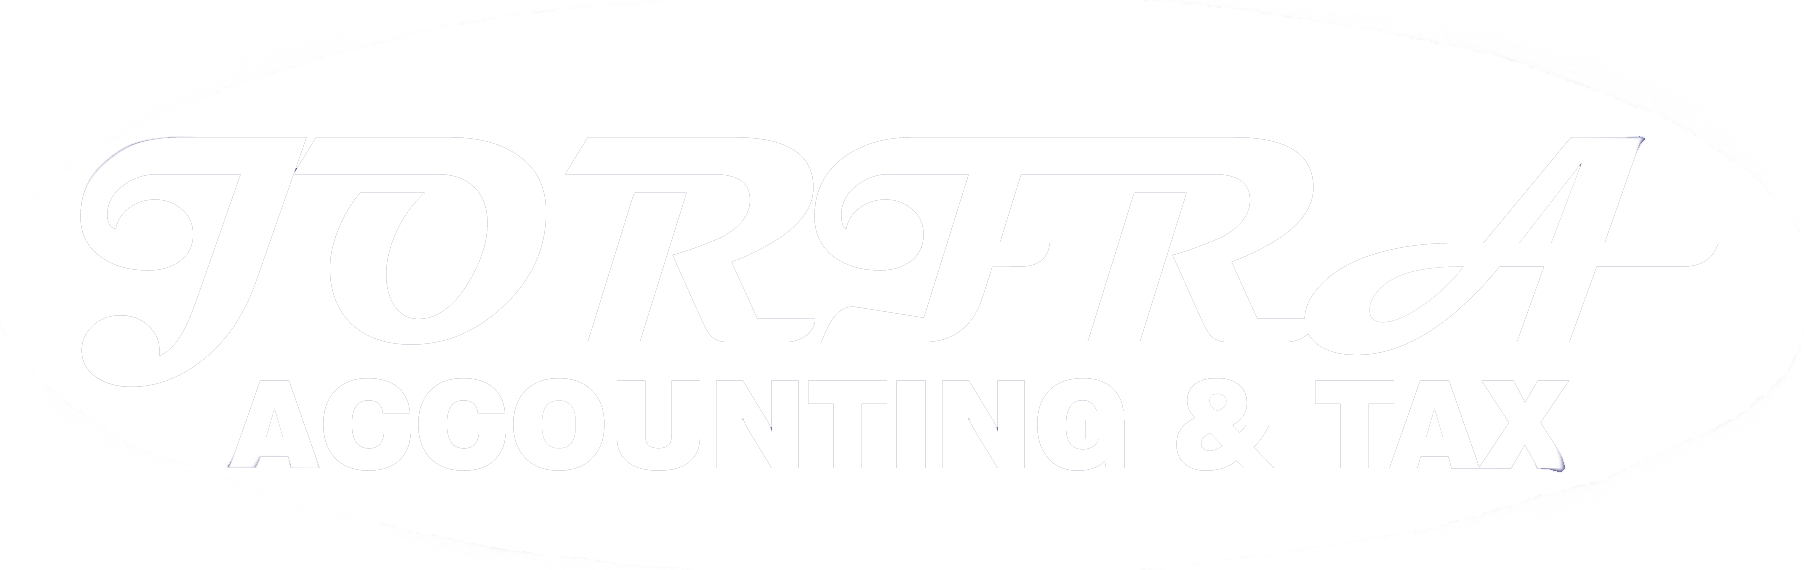 JorFra Accounting, Trainings & Tax Services Logo